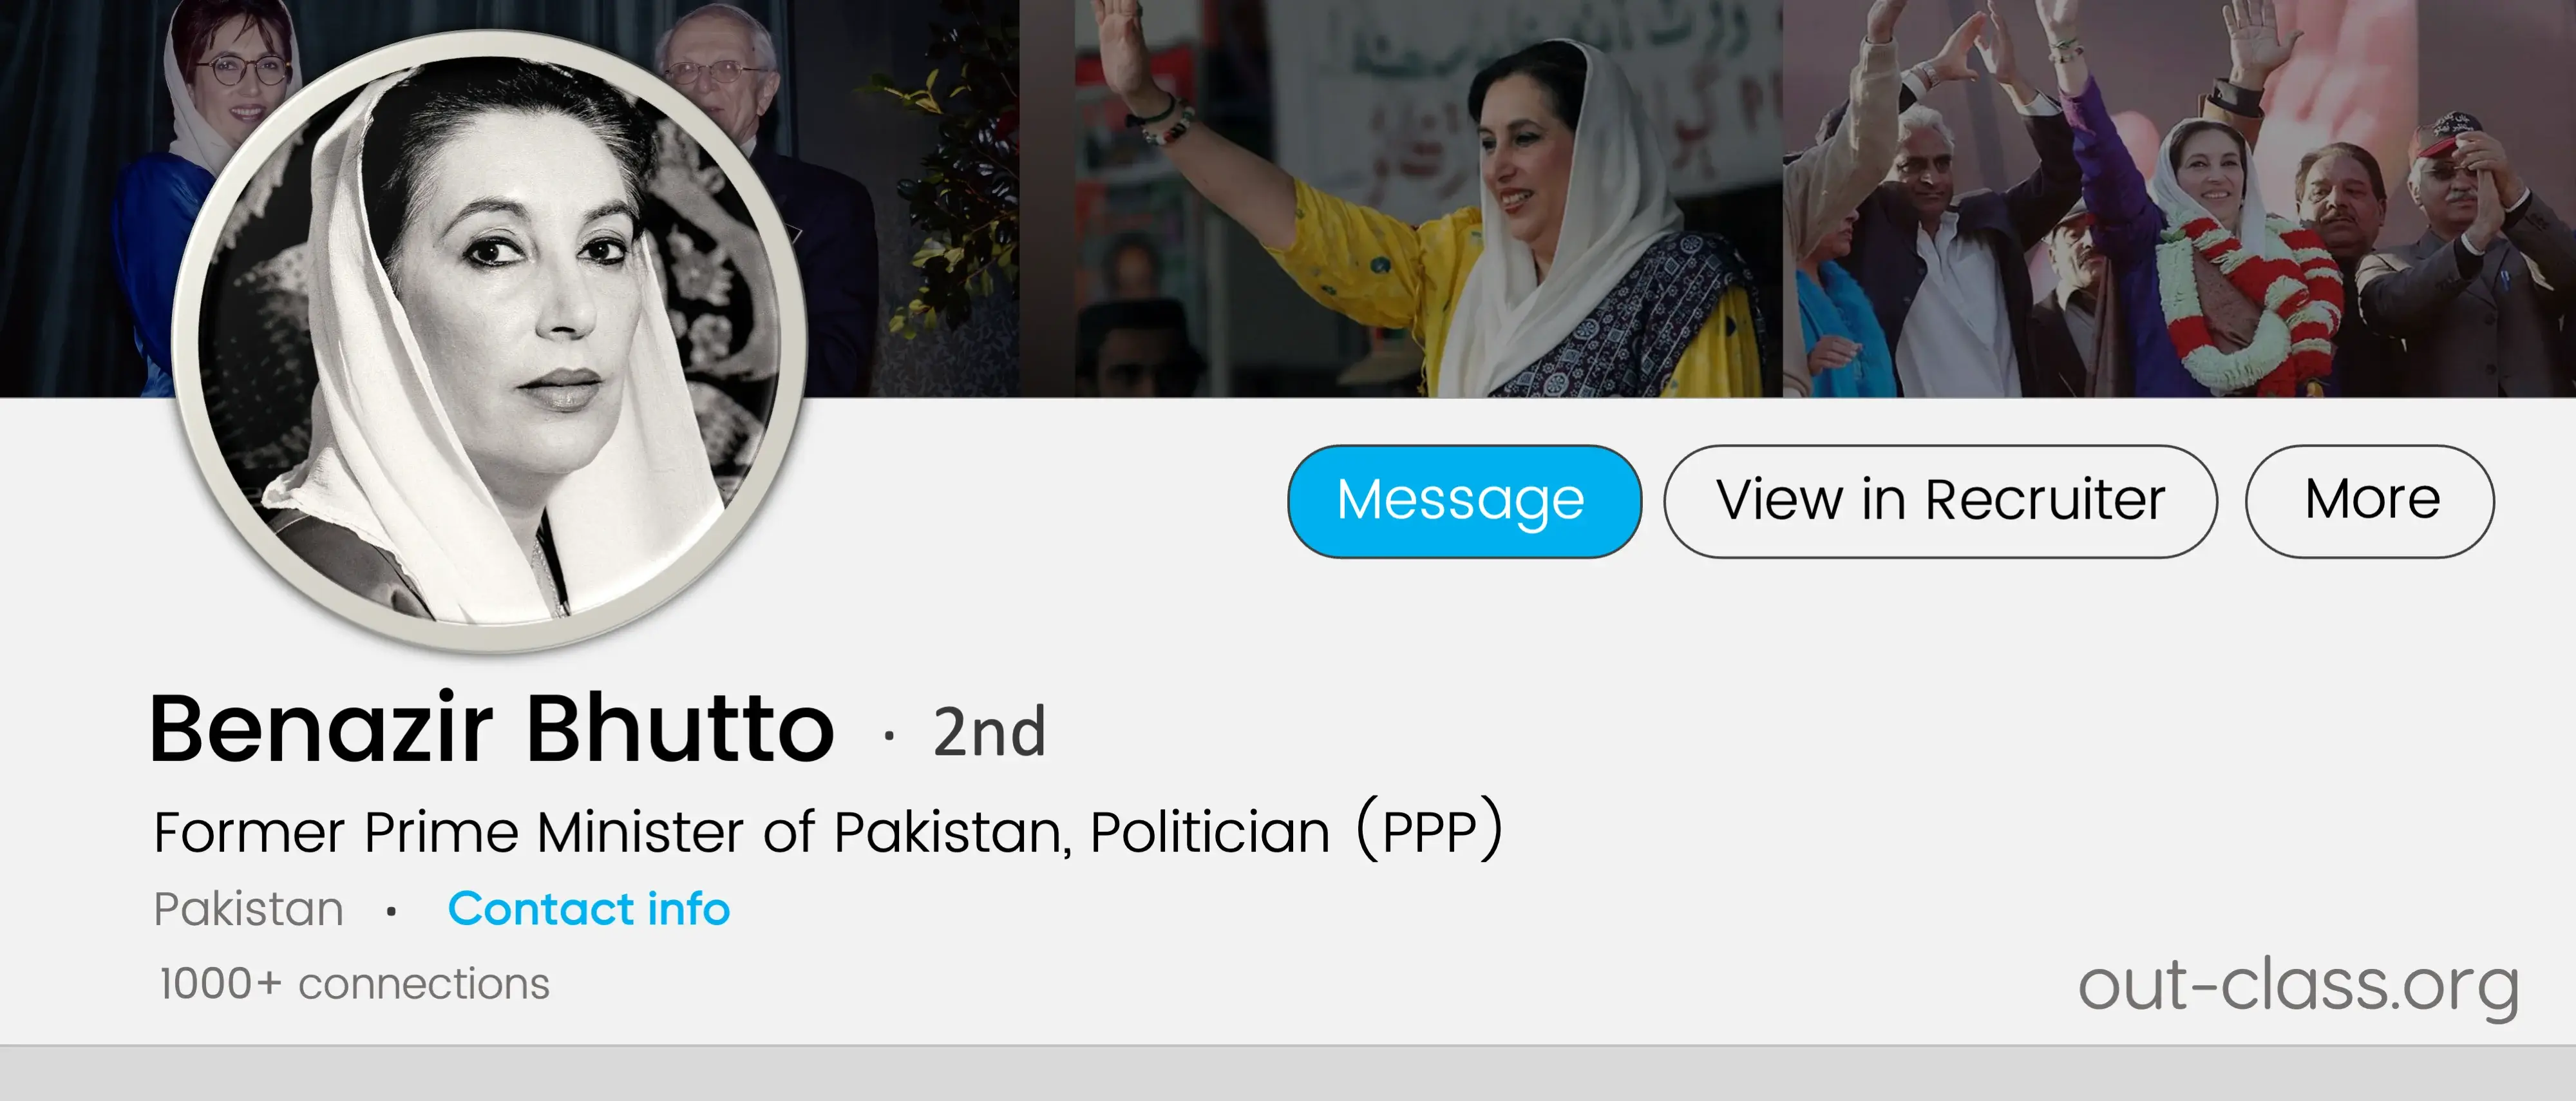 Benazir Bhutto, chairwoman PPP and first female Prime Minister of Pakistan, is a key figure of O Level Pakistan Studies for her views towards democracy as she carved her way through political history.